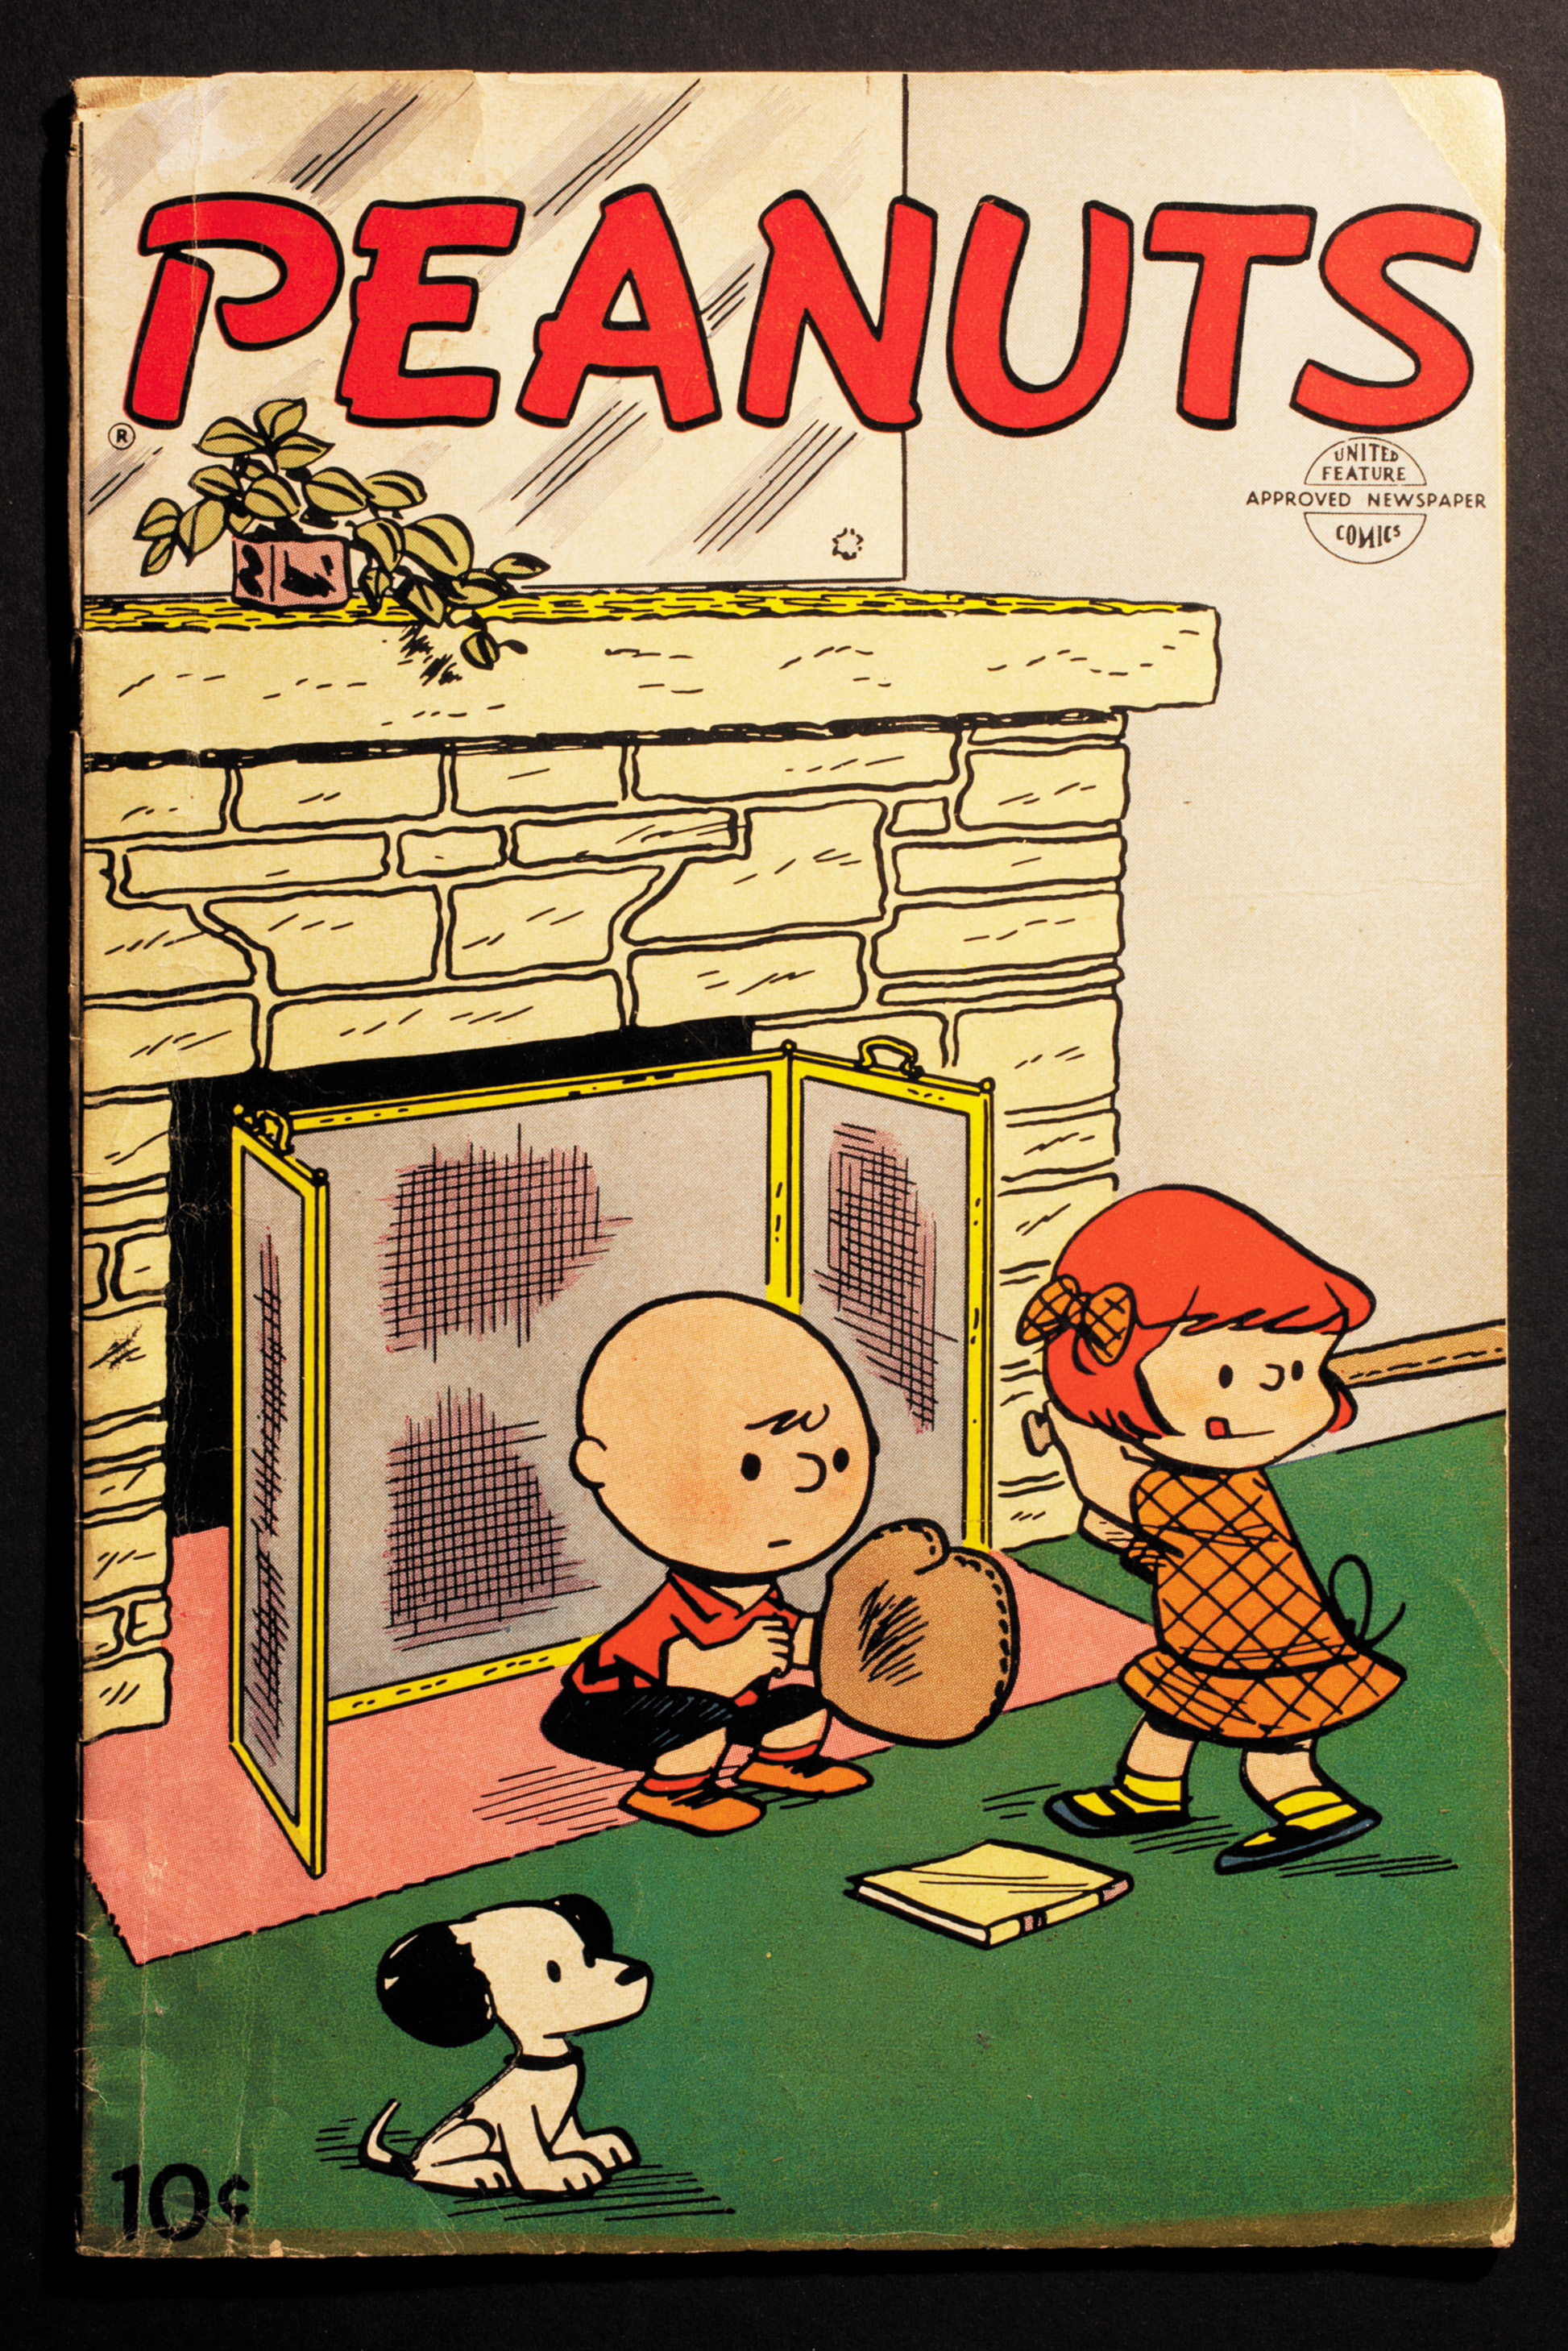 Comic book cover, Peanuts: Comics on Parade no. 1, United Feature Syndicate, 1953.